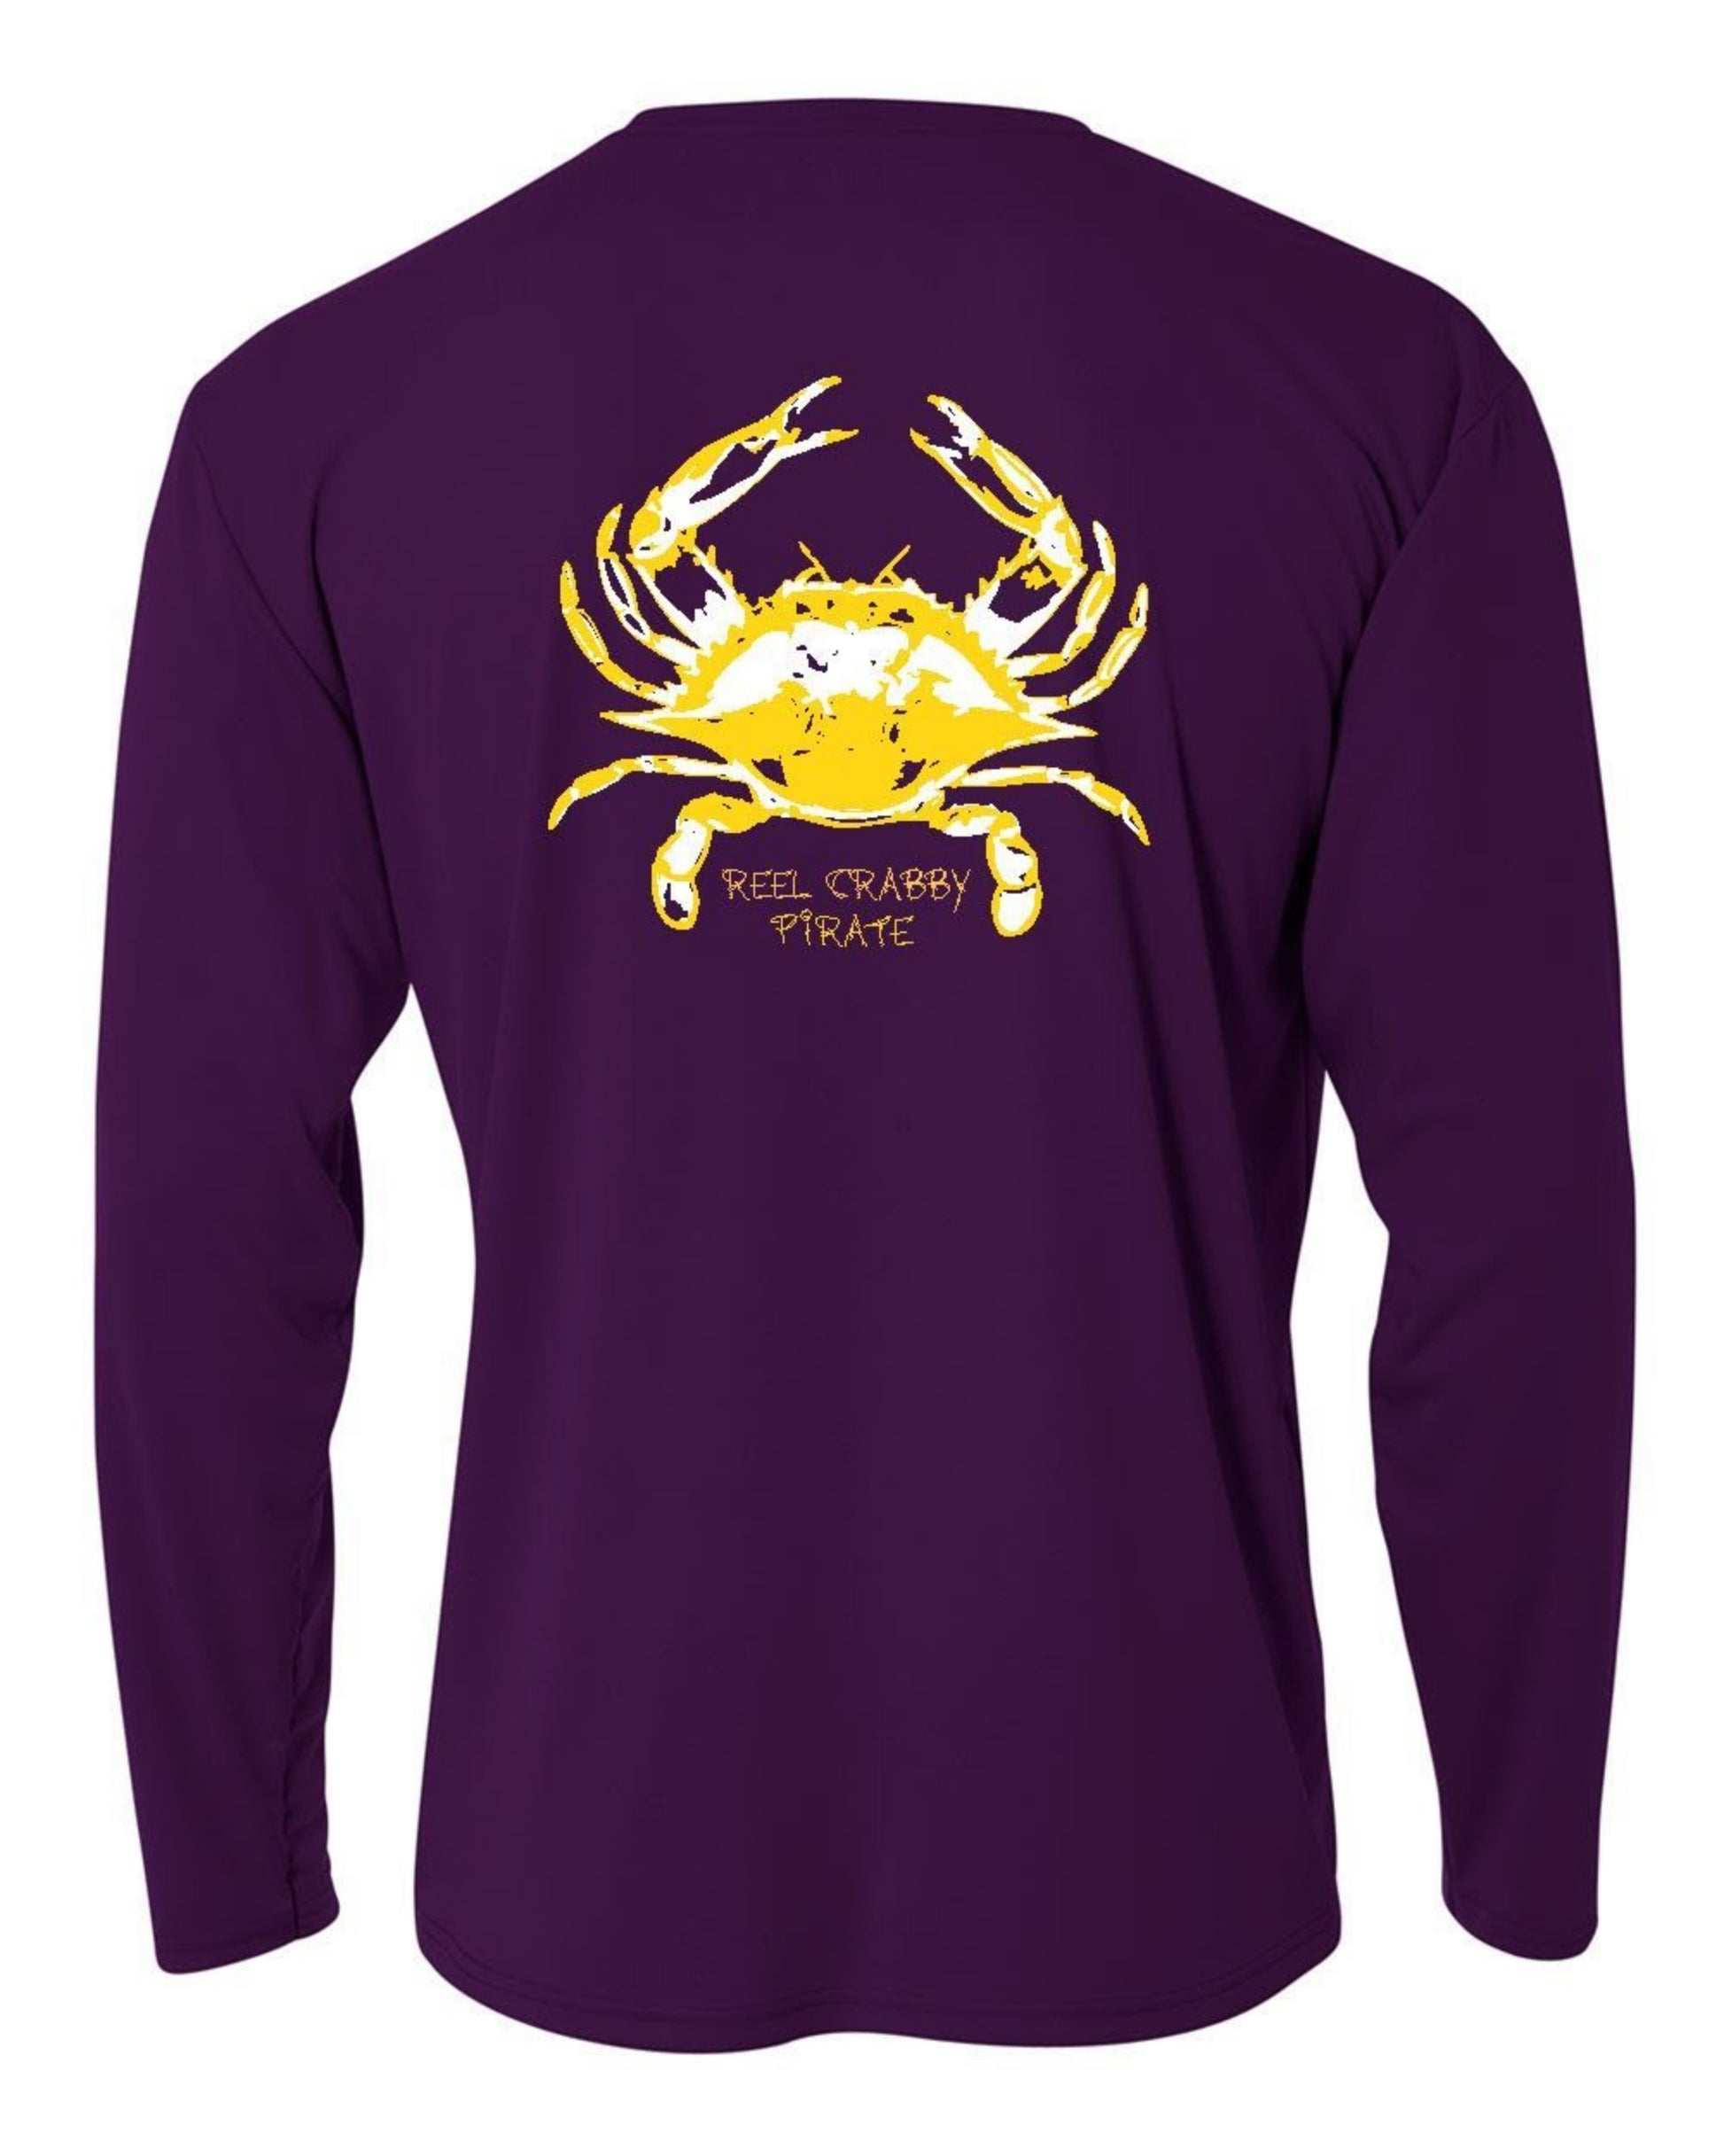 Youth Performance Fishing Shirts 50+uv Sun Protection -Reel Fishy Apparel M / Navy Lobster L/S